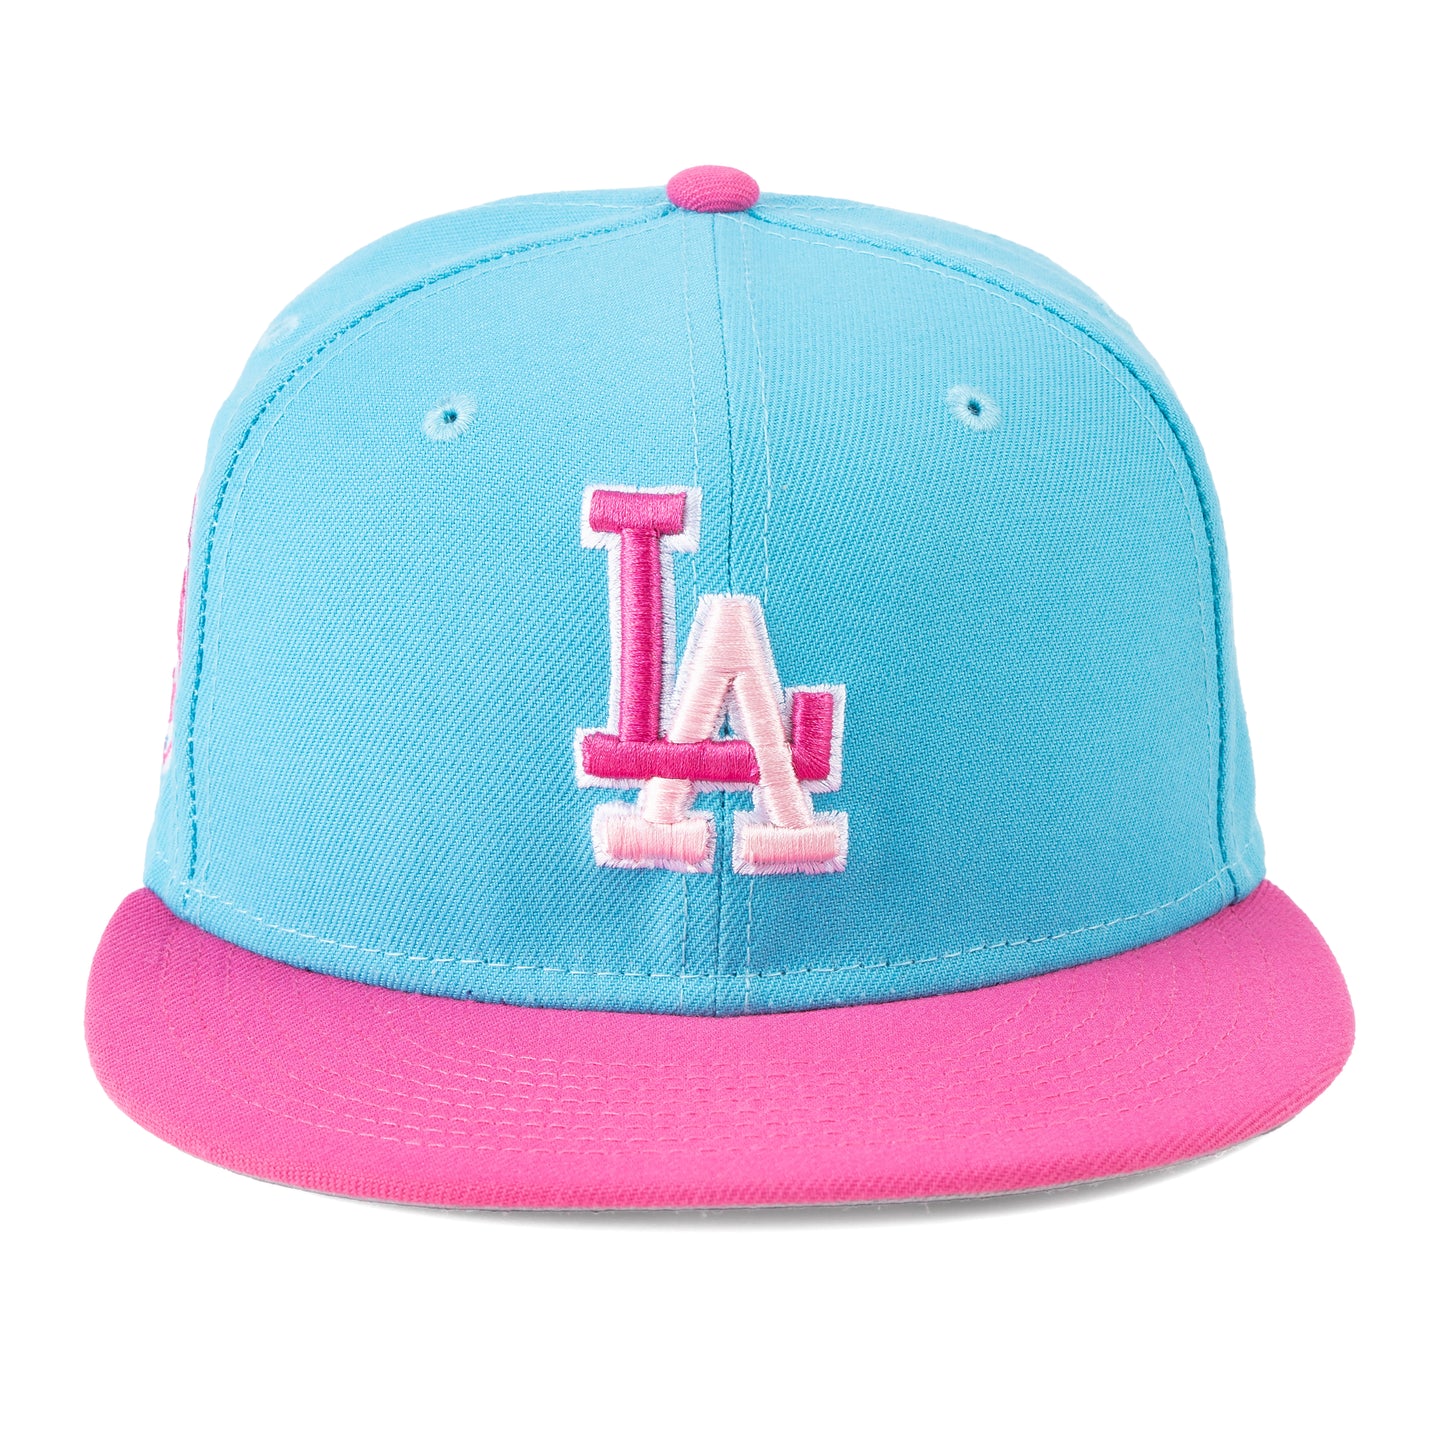 LOS ANGELES DODGERS "SOUTH BEACH" NEW ERA 59FIFTY HAT